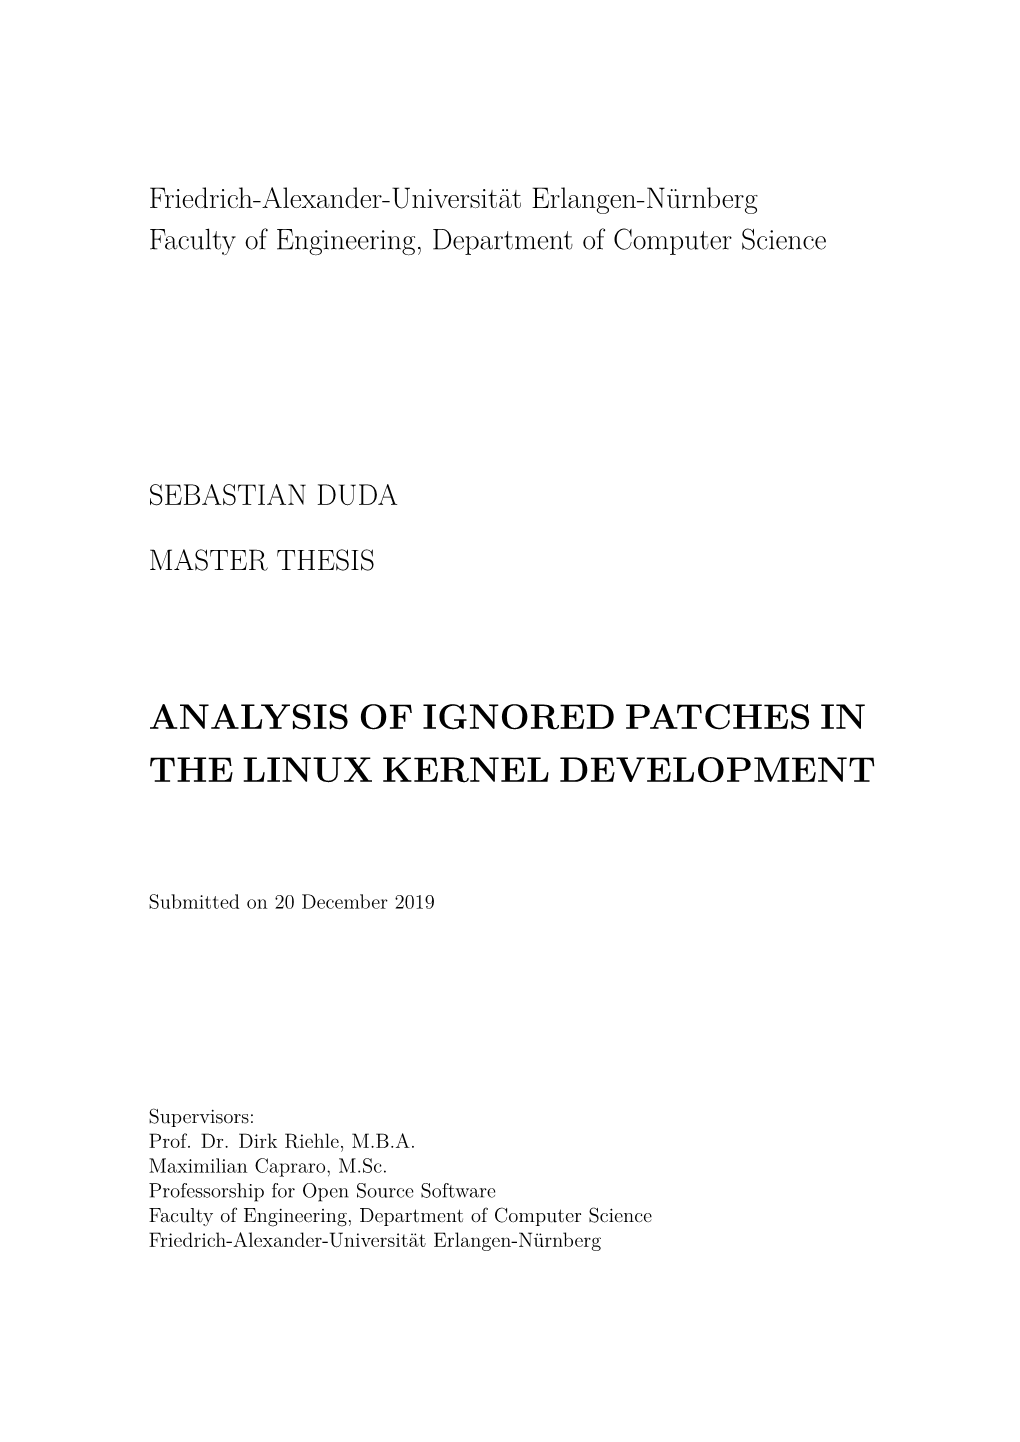 Analysis of Ignored Patches in the Linux Kernel Development